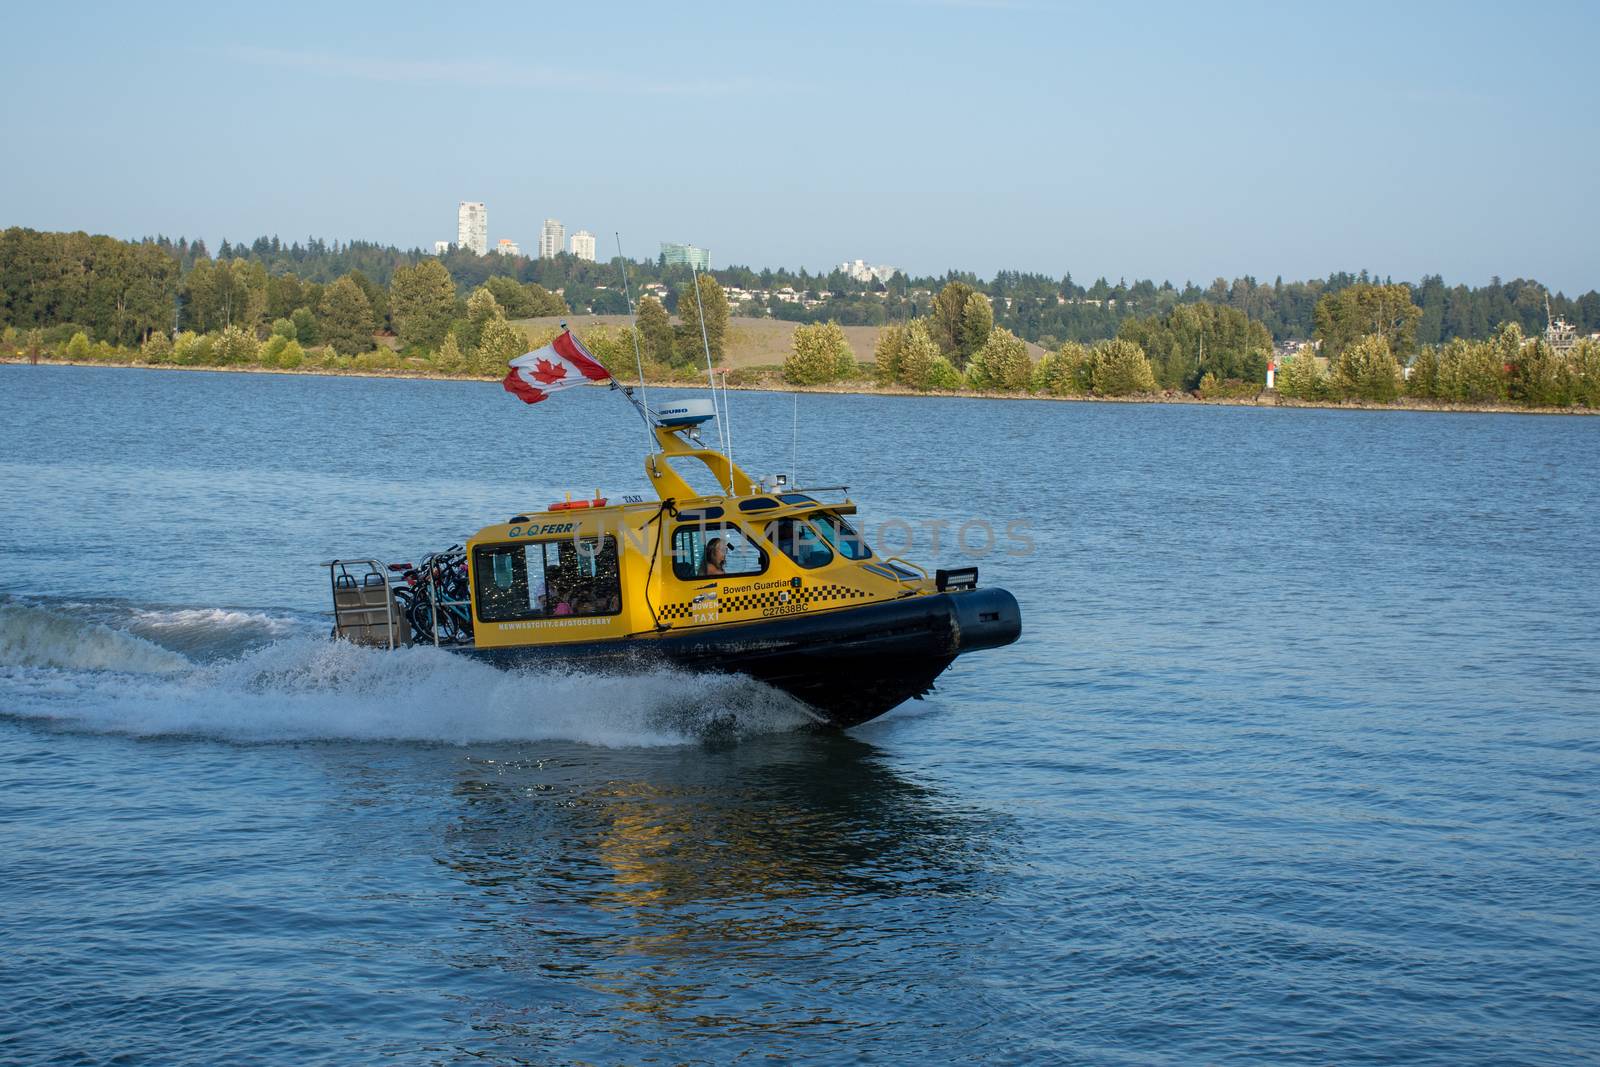 "New Westminster, British Columbia/Canada - 8/3/2019: At the New Westminster Quay, a yellow taxi ferry speed boat travels from quay pier to Queensbourgh with a Canadian flag."